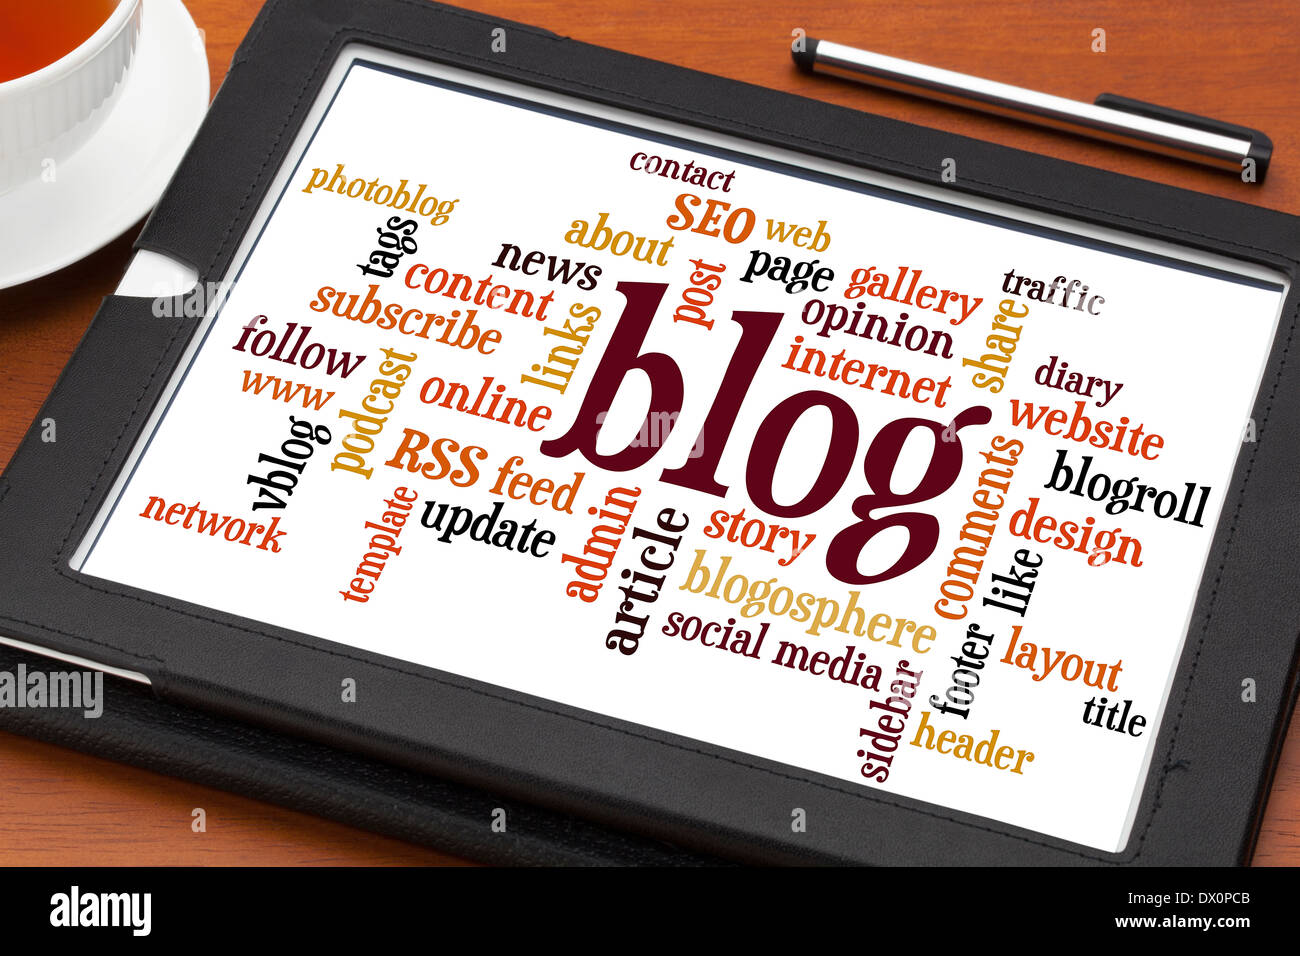 blog word cloud on a digital tablet with cup of tea and stylus pen Stock Photo